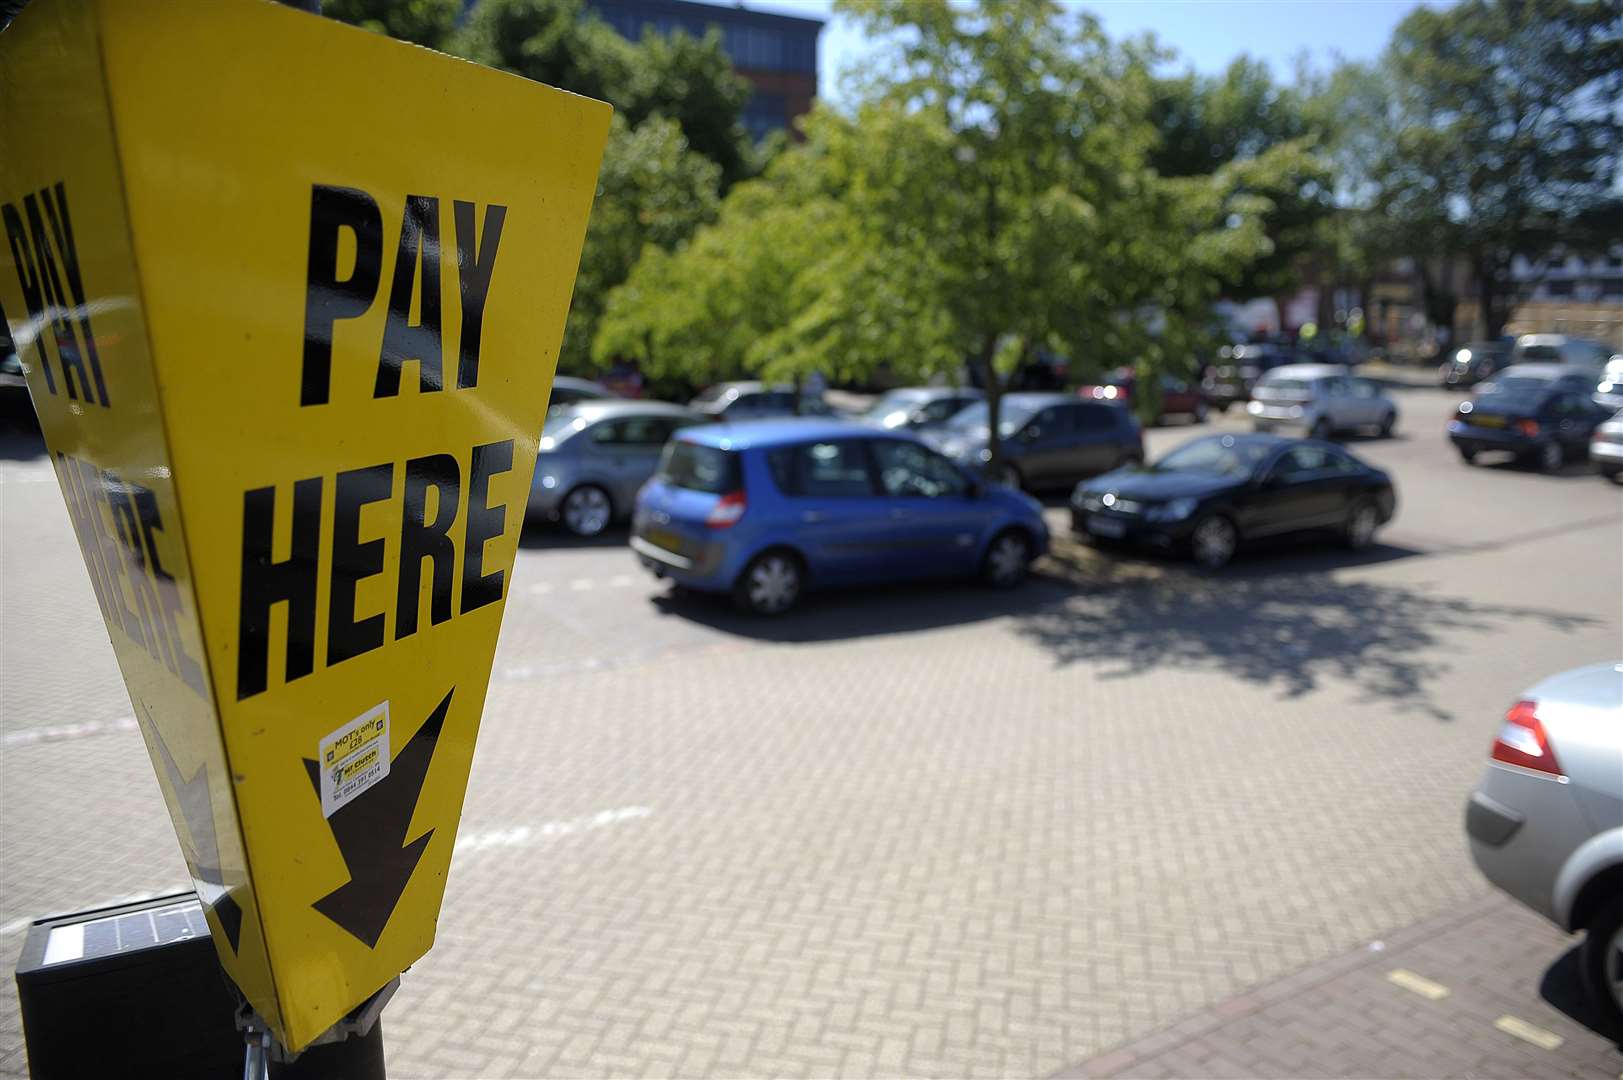 Car parking charges in one part of Kent are to become free, until further notice